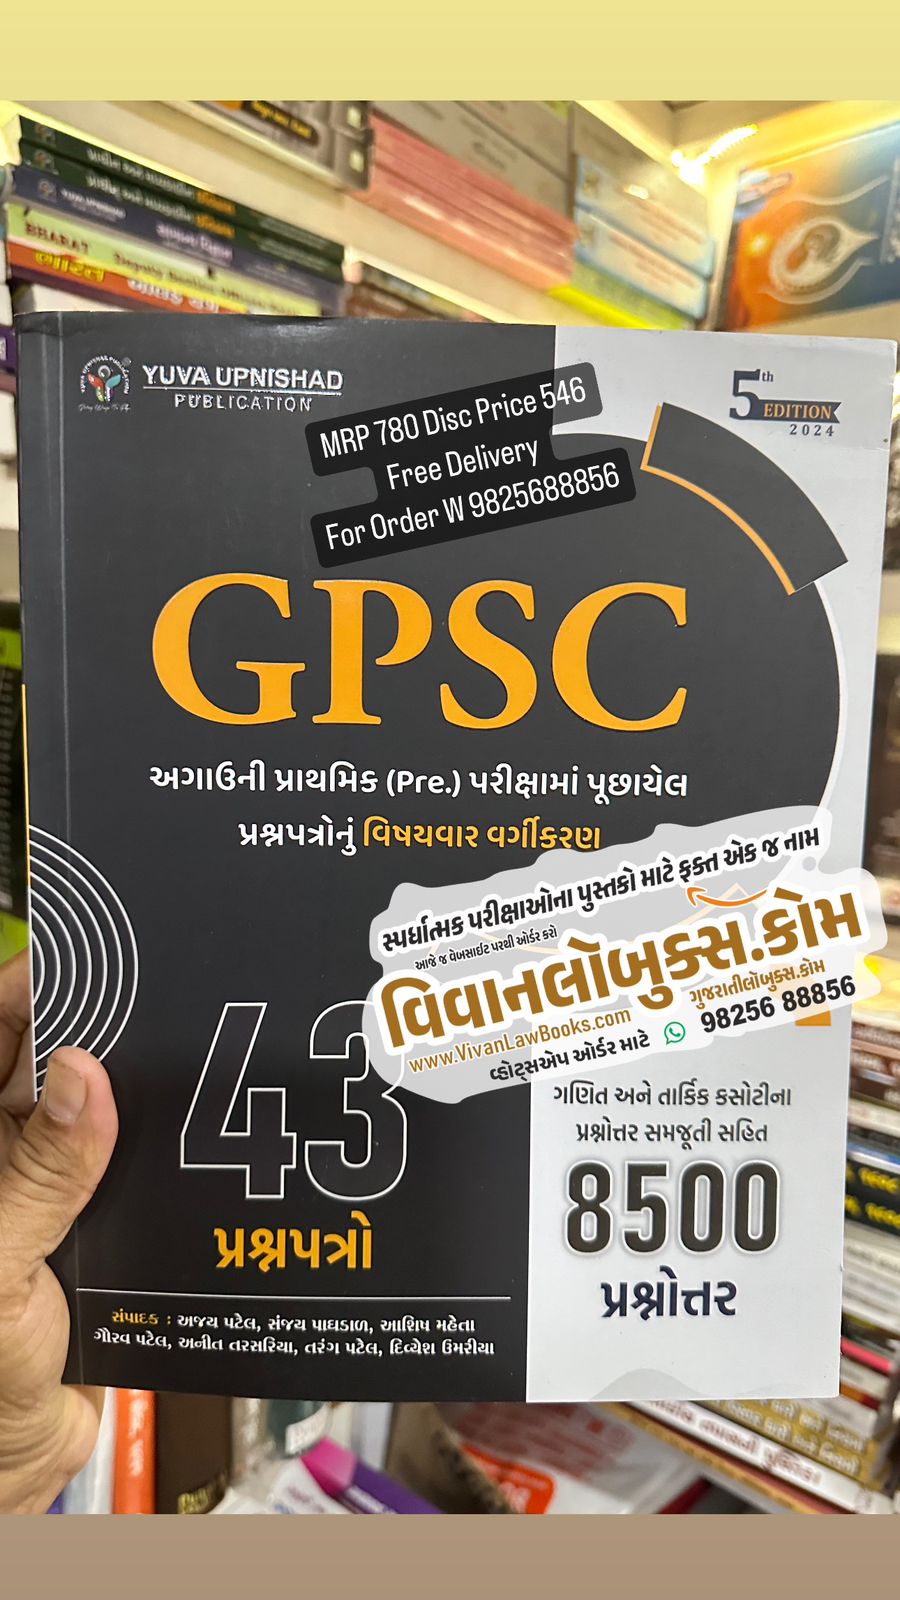 GPSC - 43 Previous Year Papers + 8500 Maths Reasoning MCQs - Latest 5th Edition 2024 Yuva Upnishad